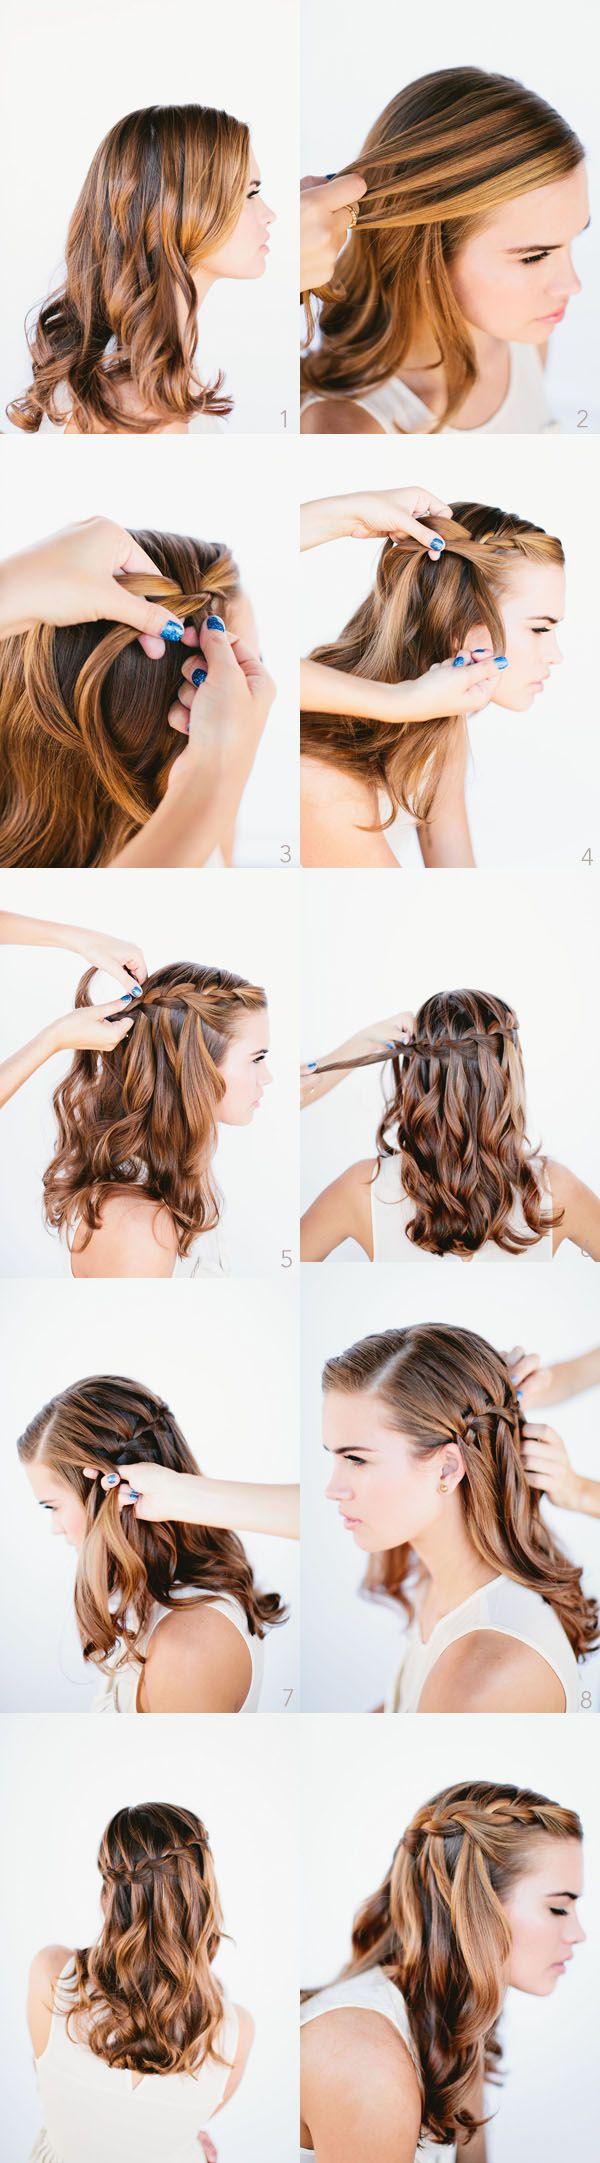 Wedding - 22 Ways To Make Your Hairstyle With Braids